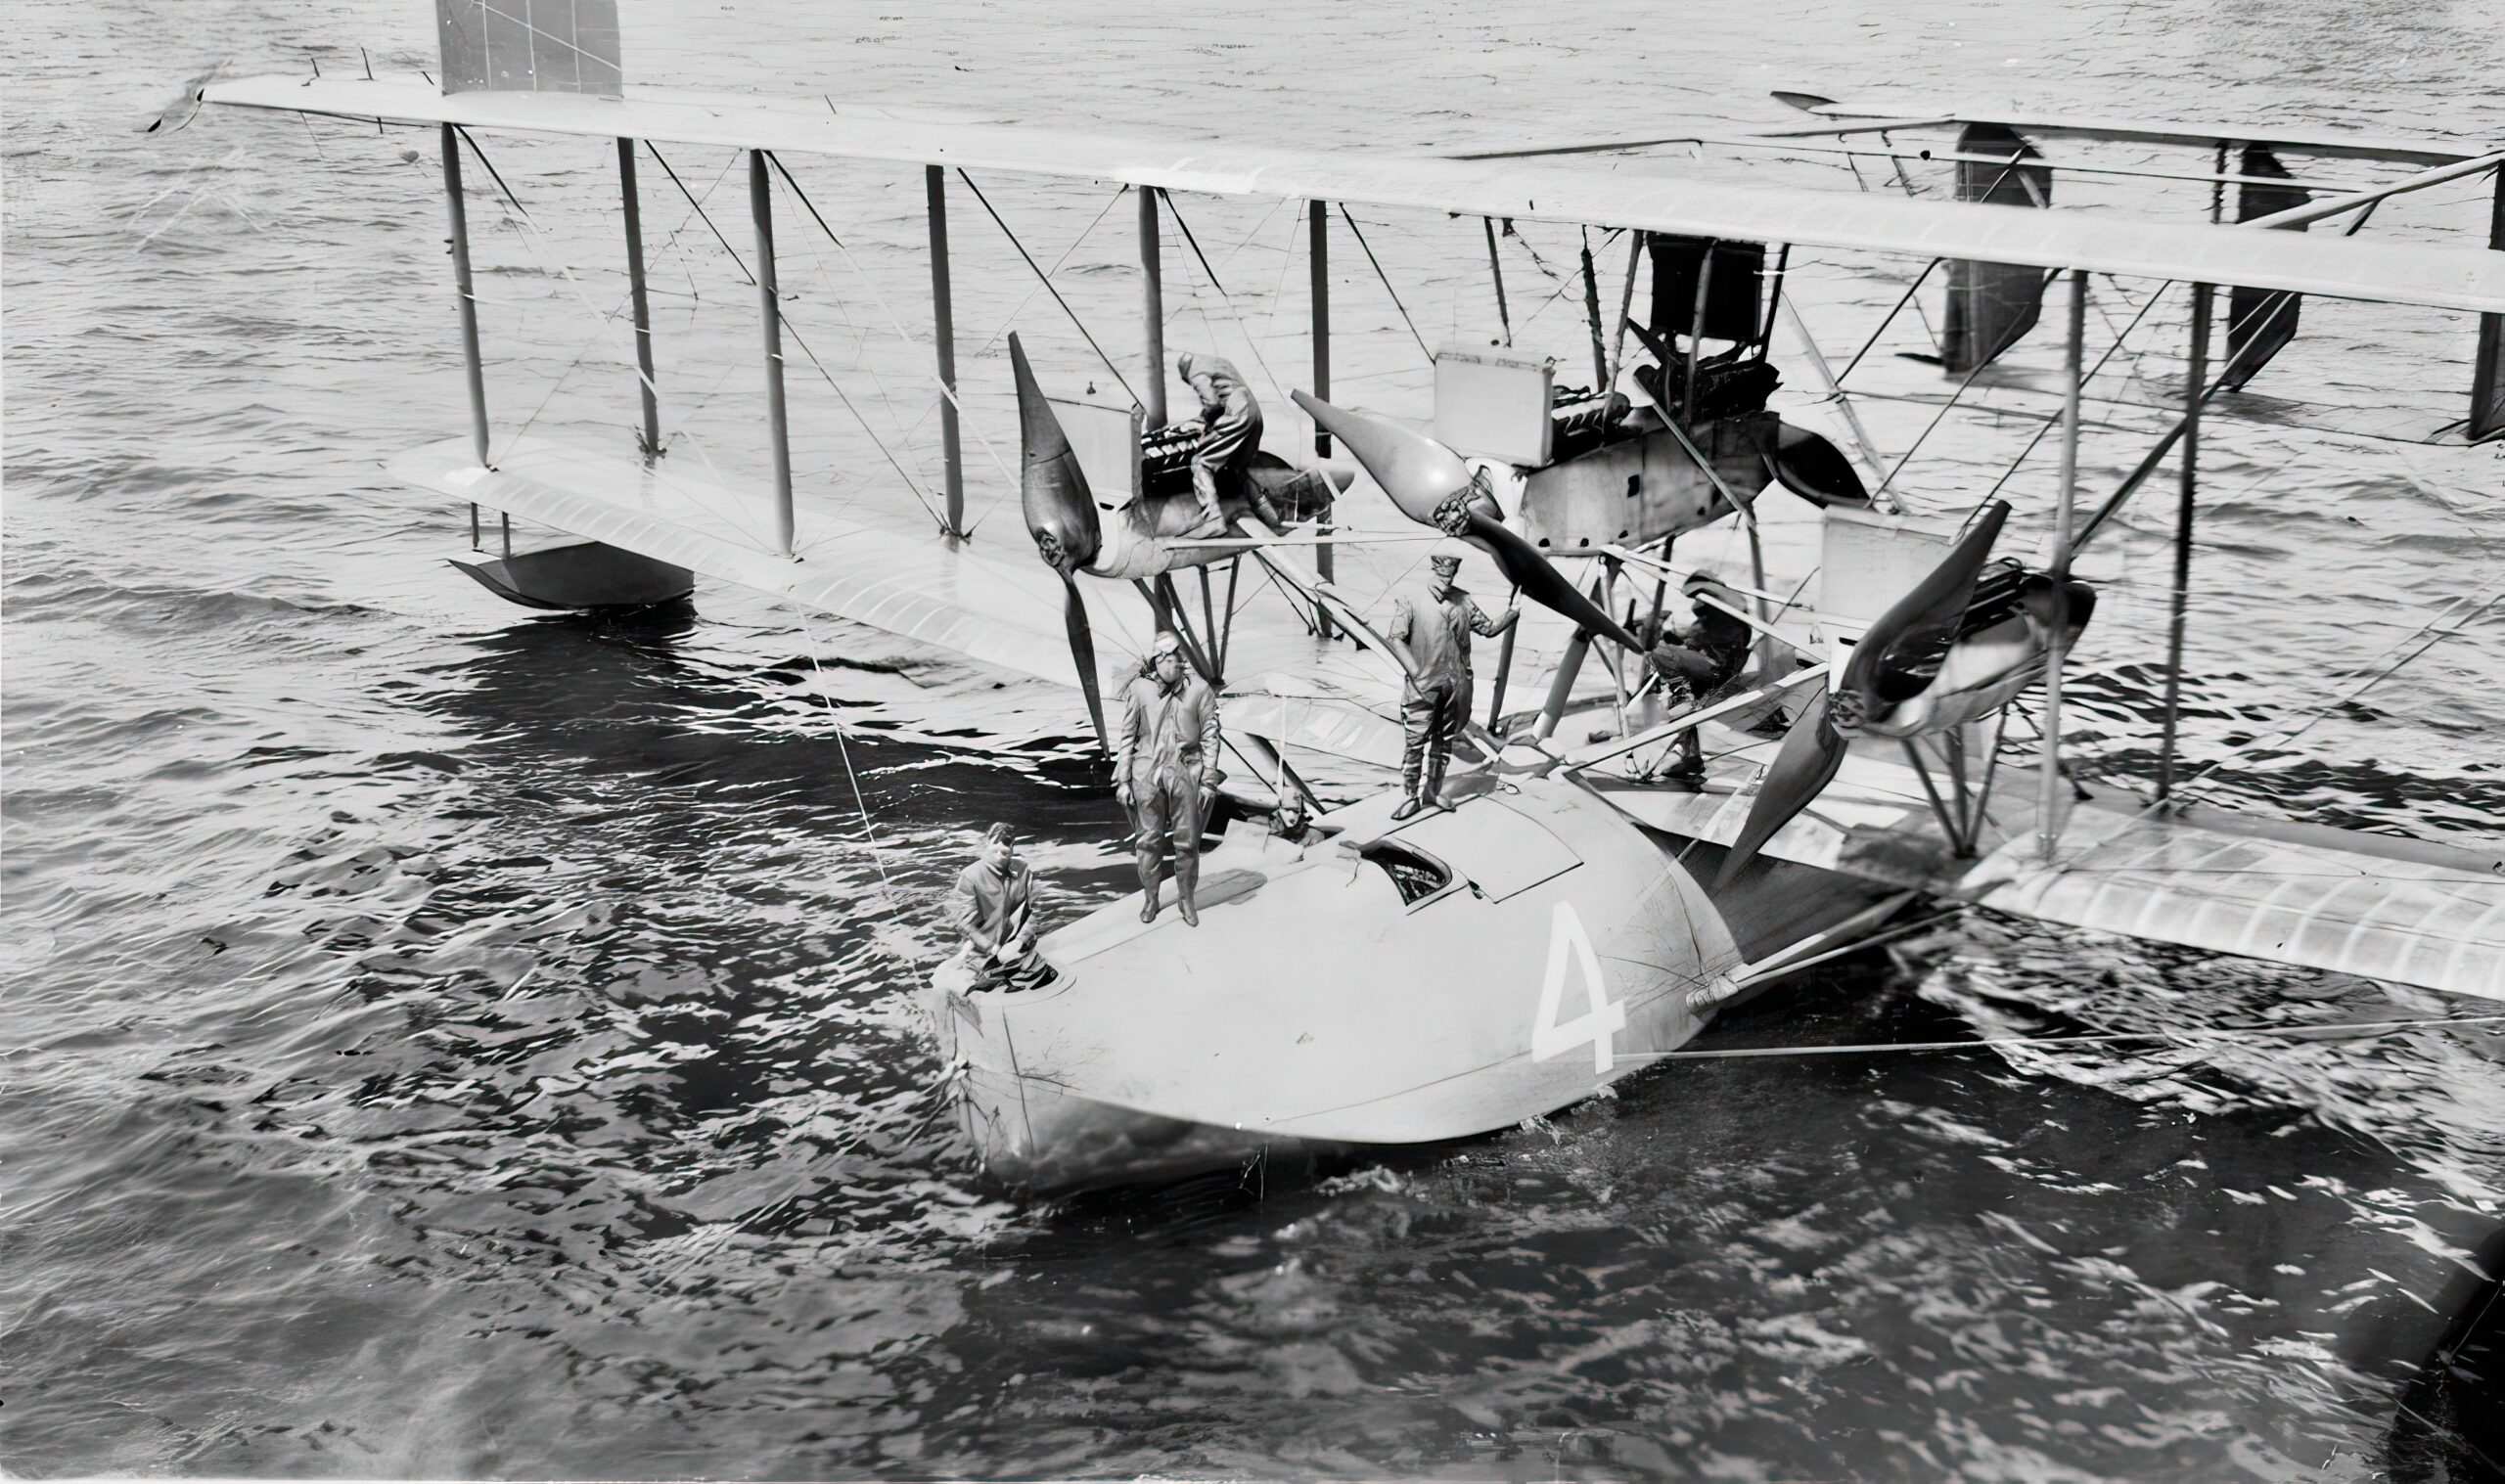 Curtiss NC-4 Navy flying boats